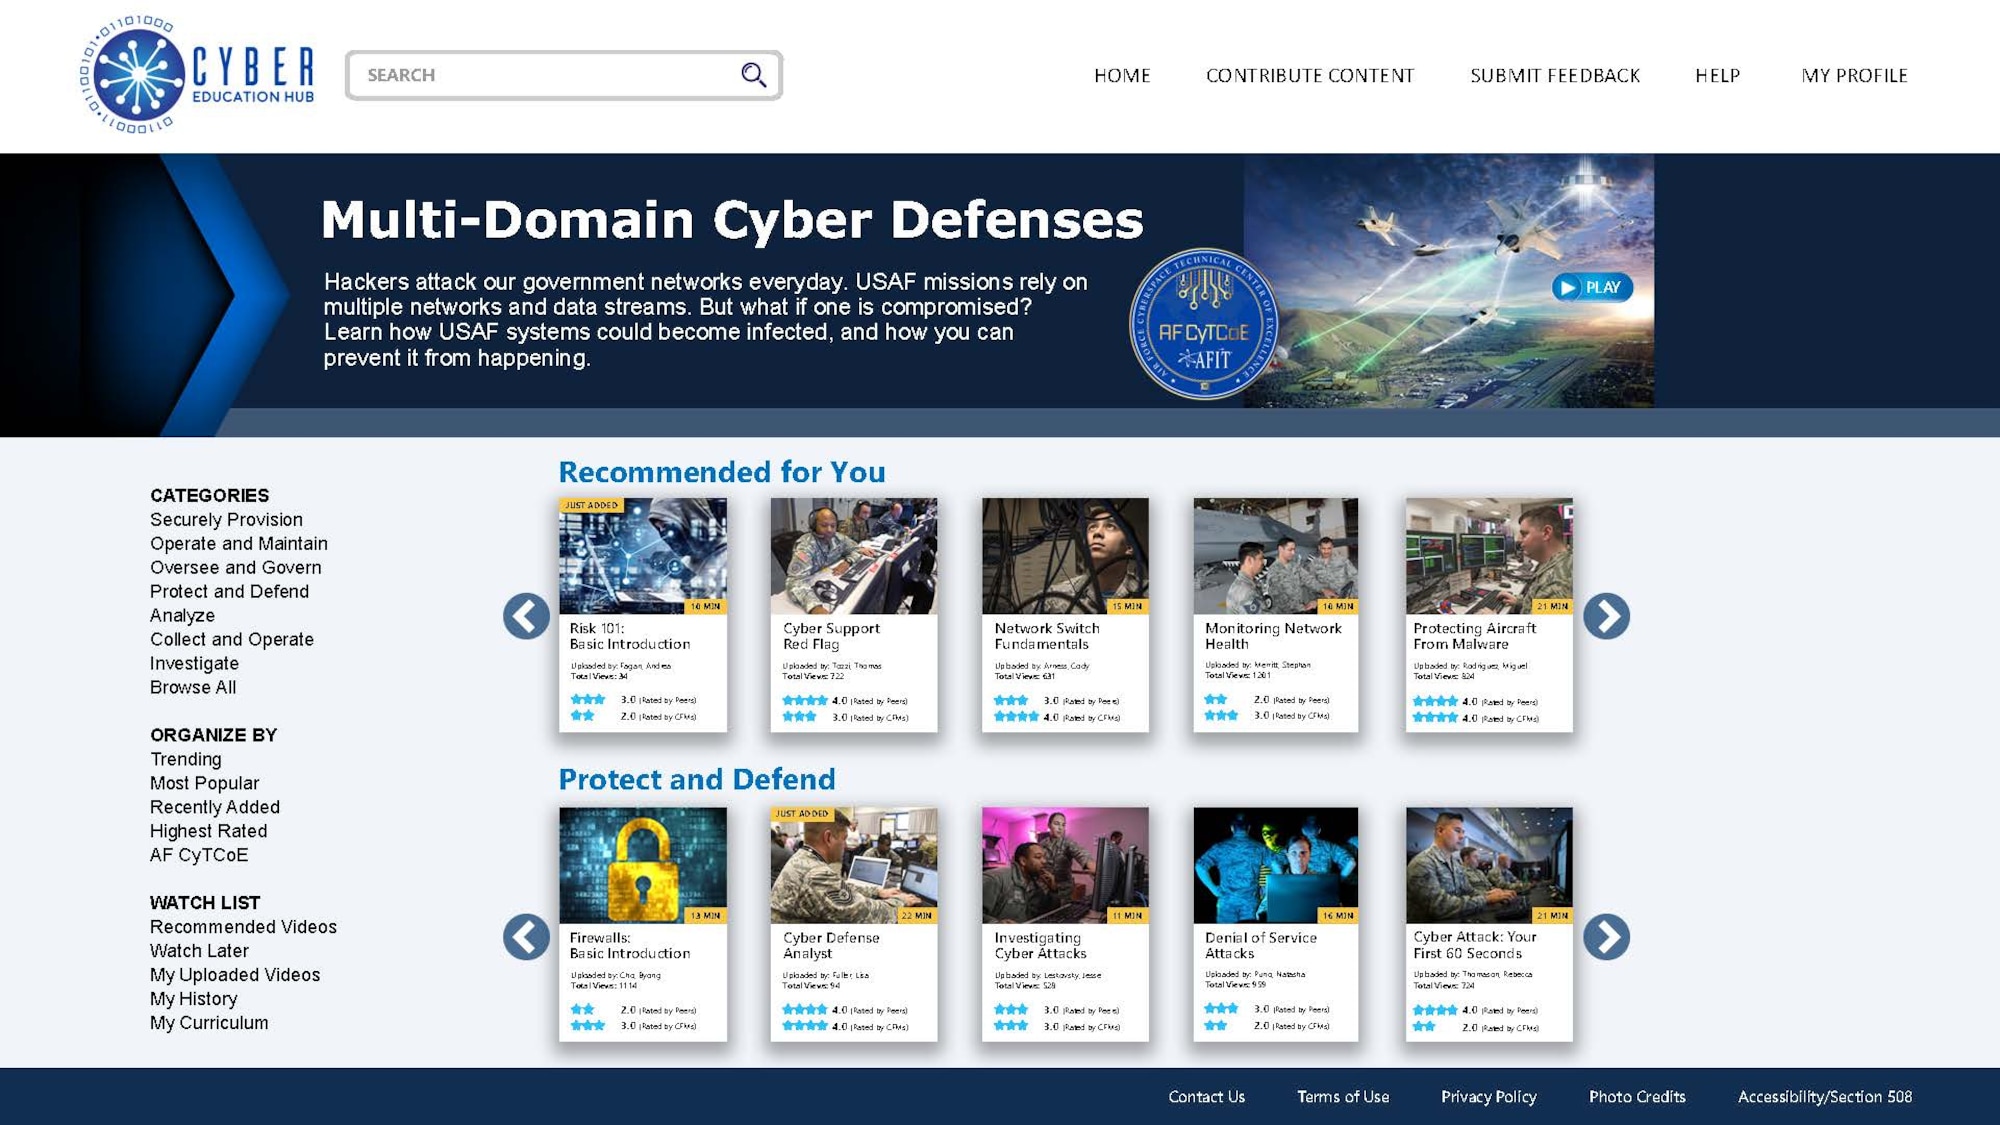 Proposed user content page on the Cyber Education Hub which is being developed at the Center for Cyberspace Research in the Air Force Institute of Technology at Wright Patterson Air Force Base, Ohio. The online site is a platform for multimedia cyber education content geared to cyber experts and Airmen seeking knowledge of how cyber applies to their career fields. The site builds user profiles based on user viewing history, job description and preferences, as well as command directives. (Photo / AFIT CCR)